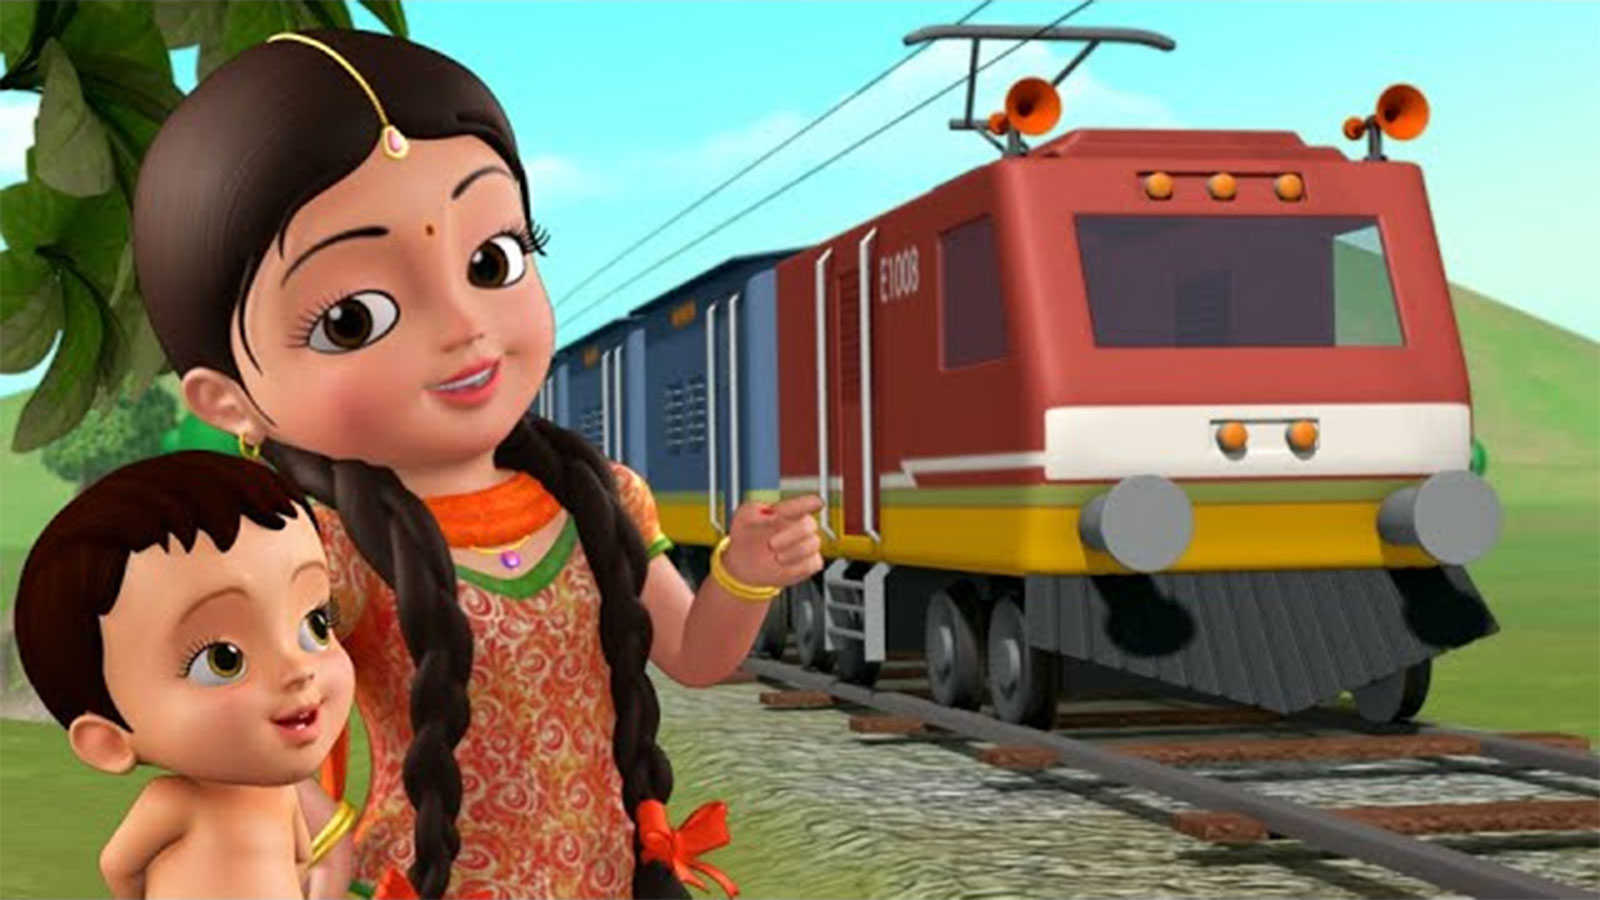 Popular Kids Songs and Hindi Nursery Rhyme 'Chuk Chuk Rail Gadi' for Kids -  Check out Children's Nursery Rhymes, Baby Songs, Fairy Tales And Many More  In Hindi | Entertainment - Times